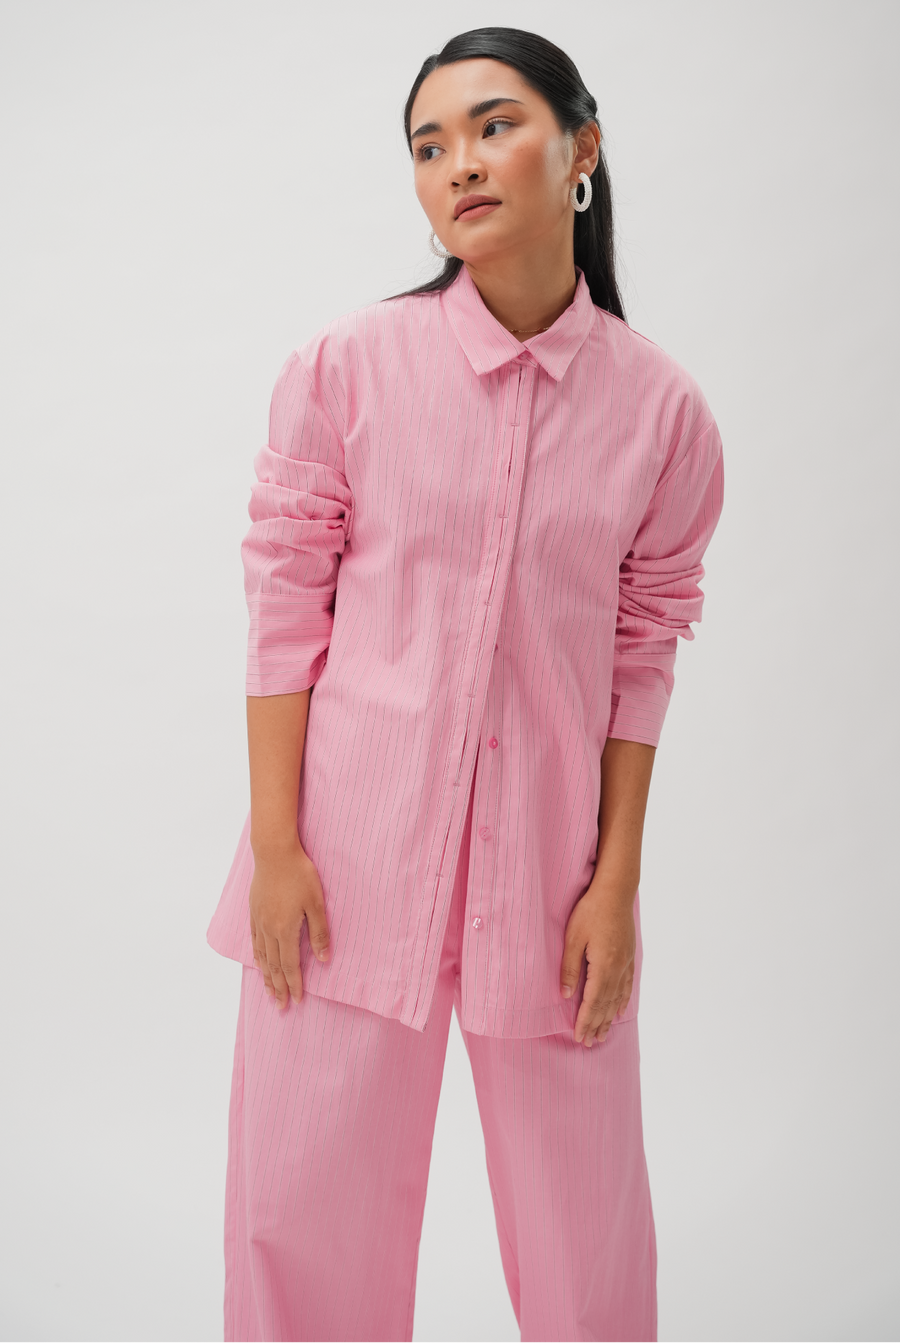 Out of Office Set in Pink Stripe